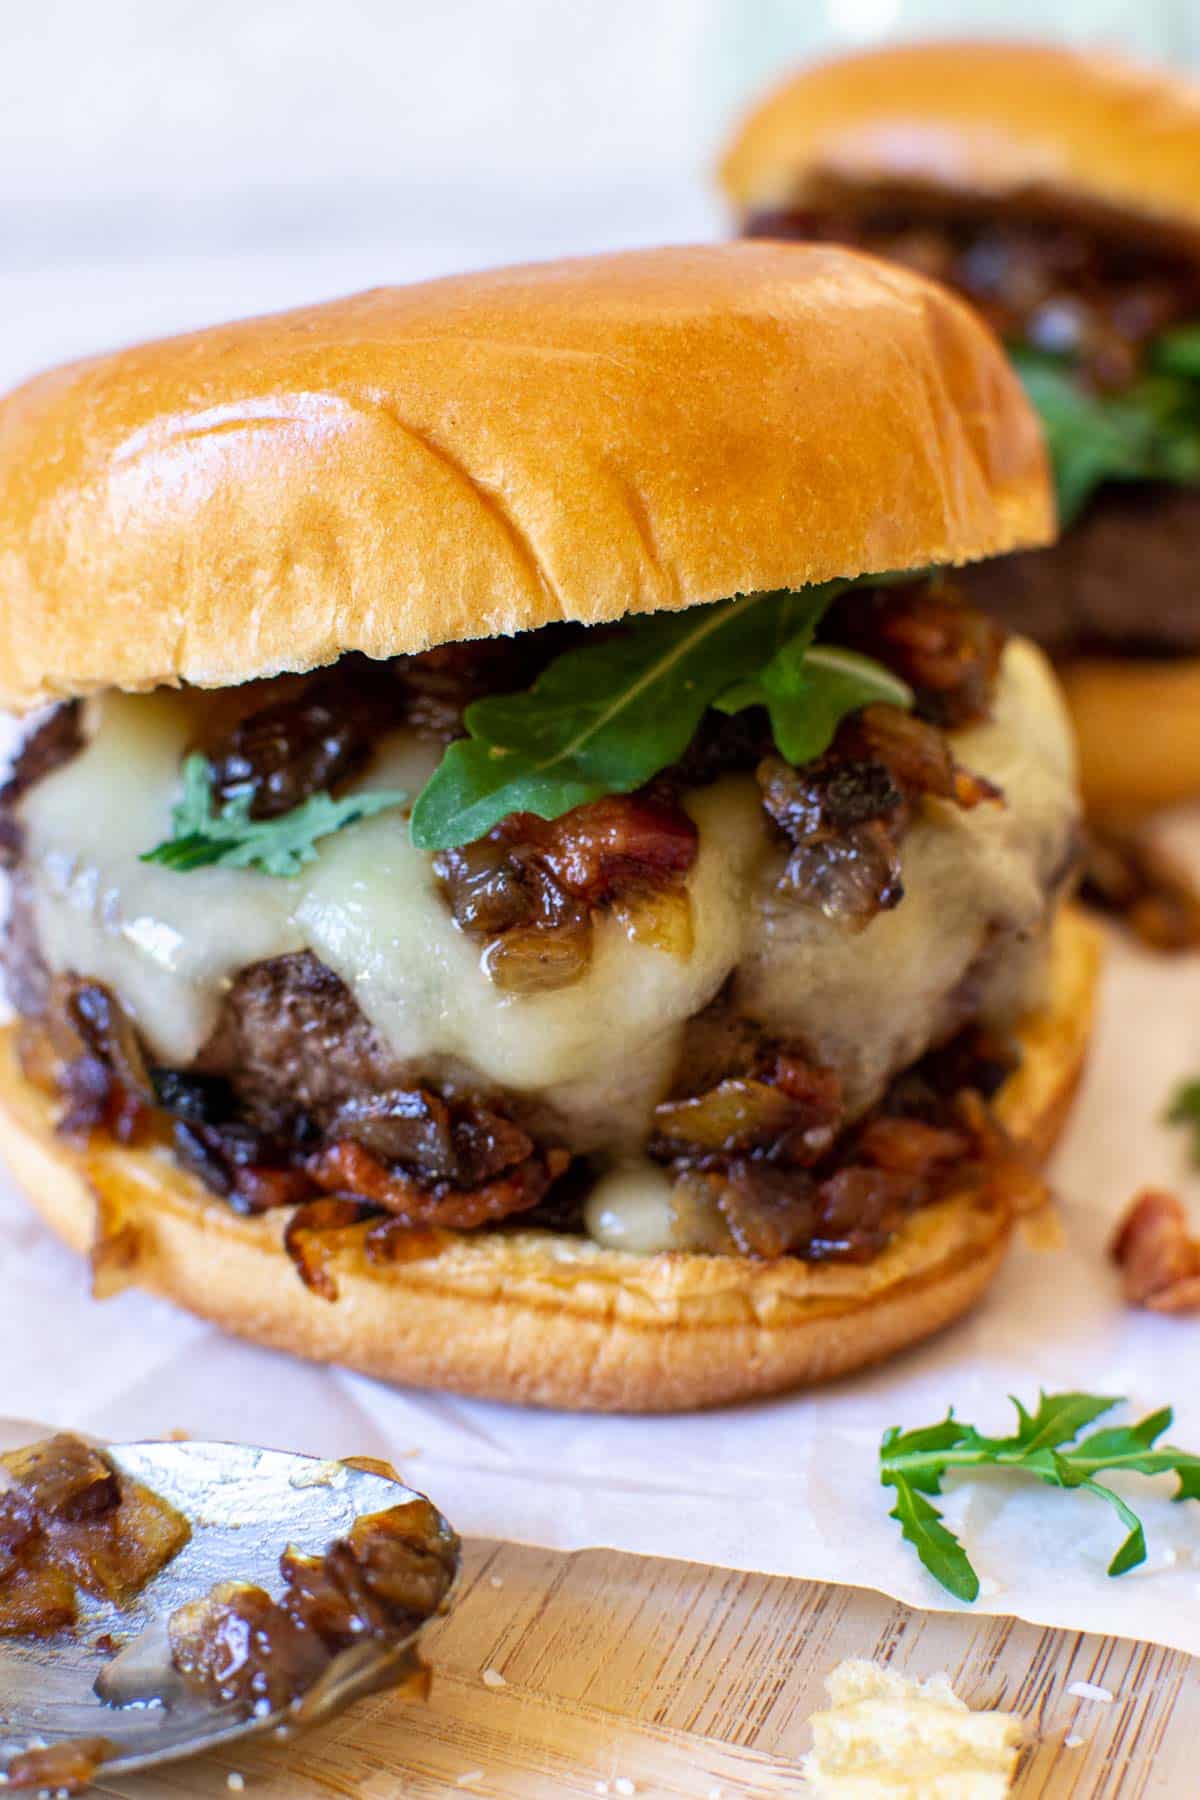 Brie burger with caramelized onions, cheese and arugula.